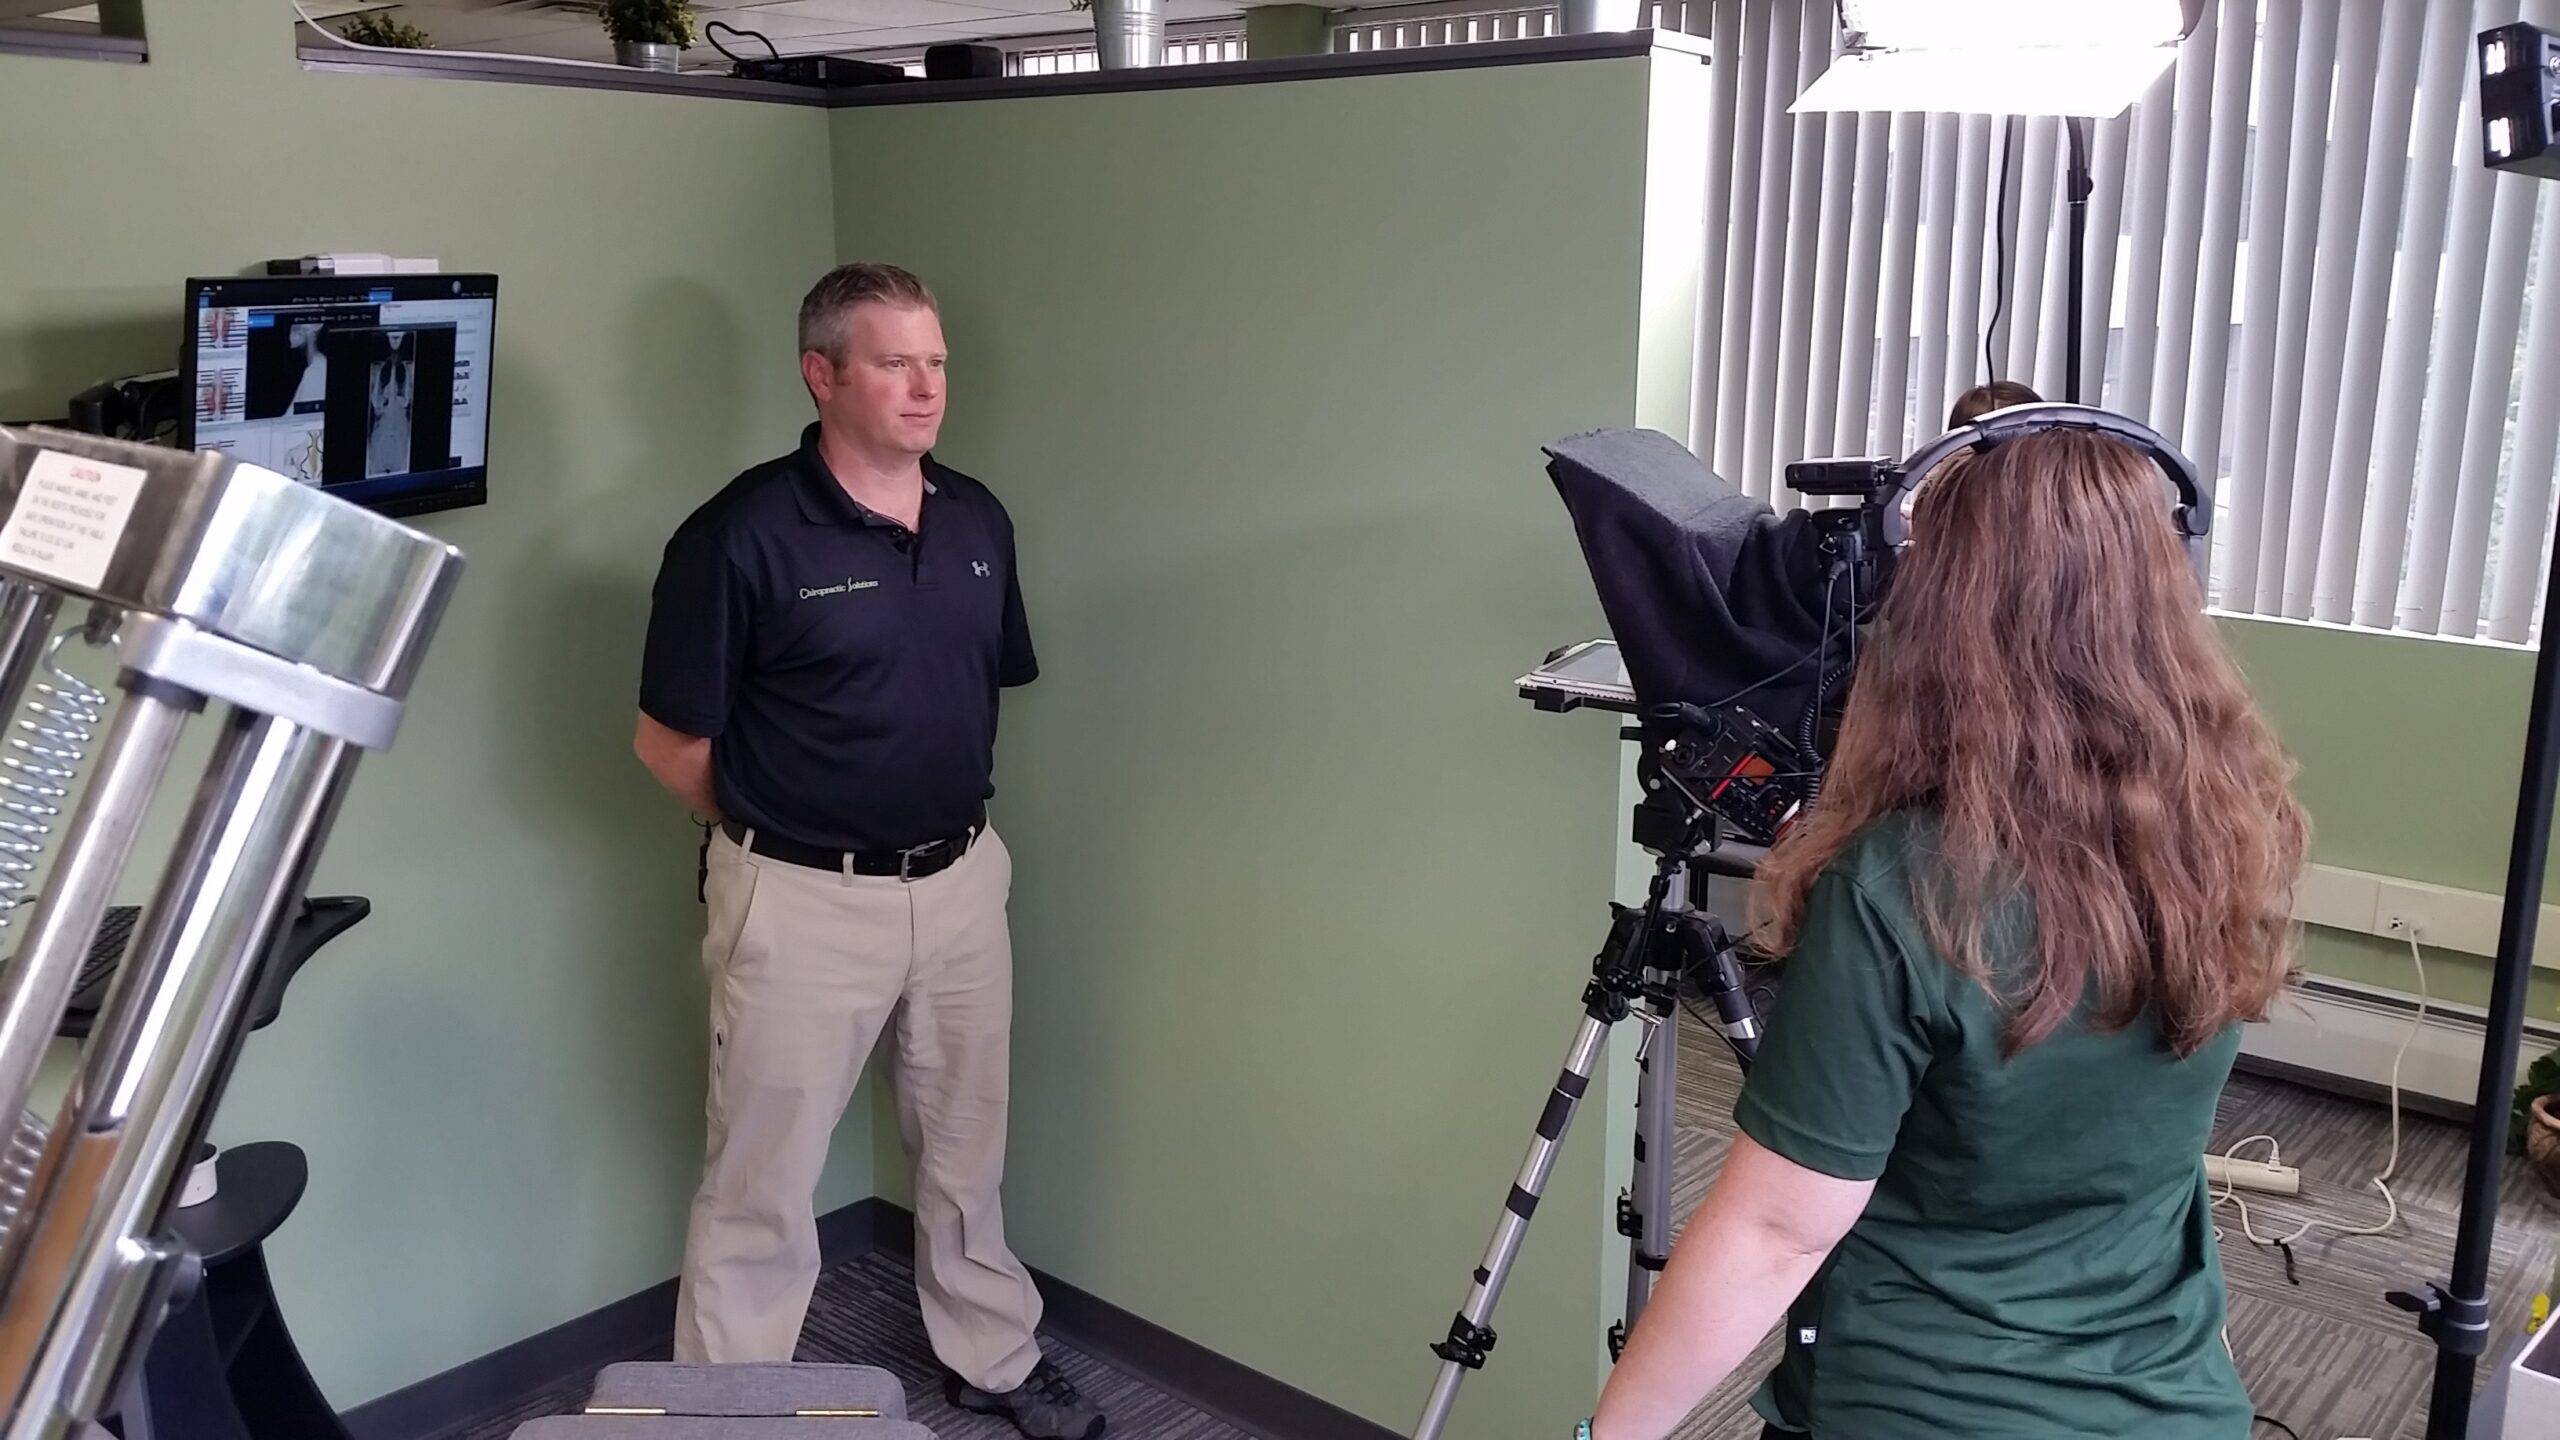 Lead Editor and Creative Director, Candice Moore, using a teleprompter while recording a video with Dr. Chris Hauck of Chiropractic Solutions